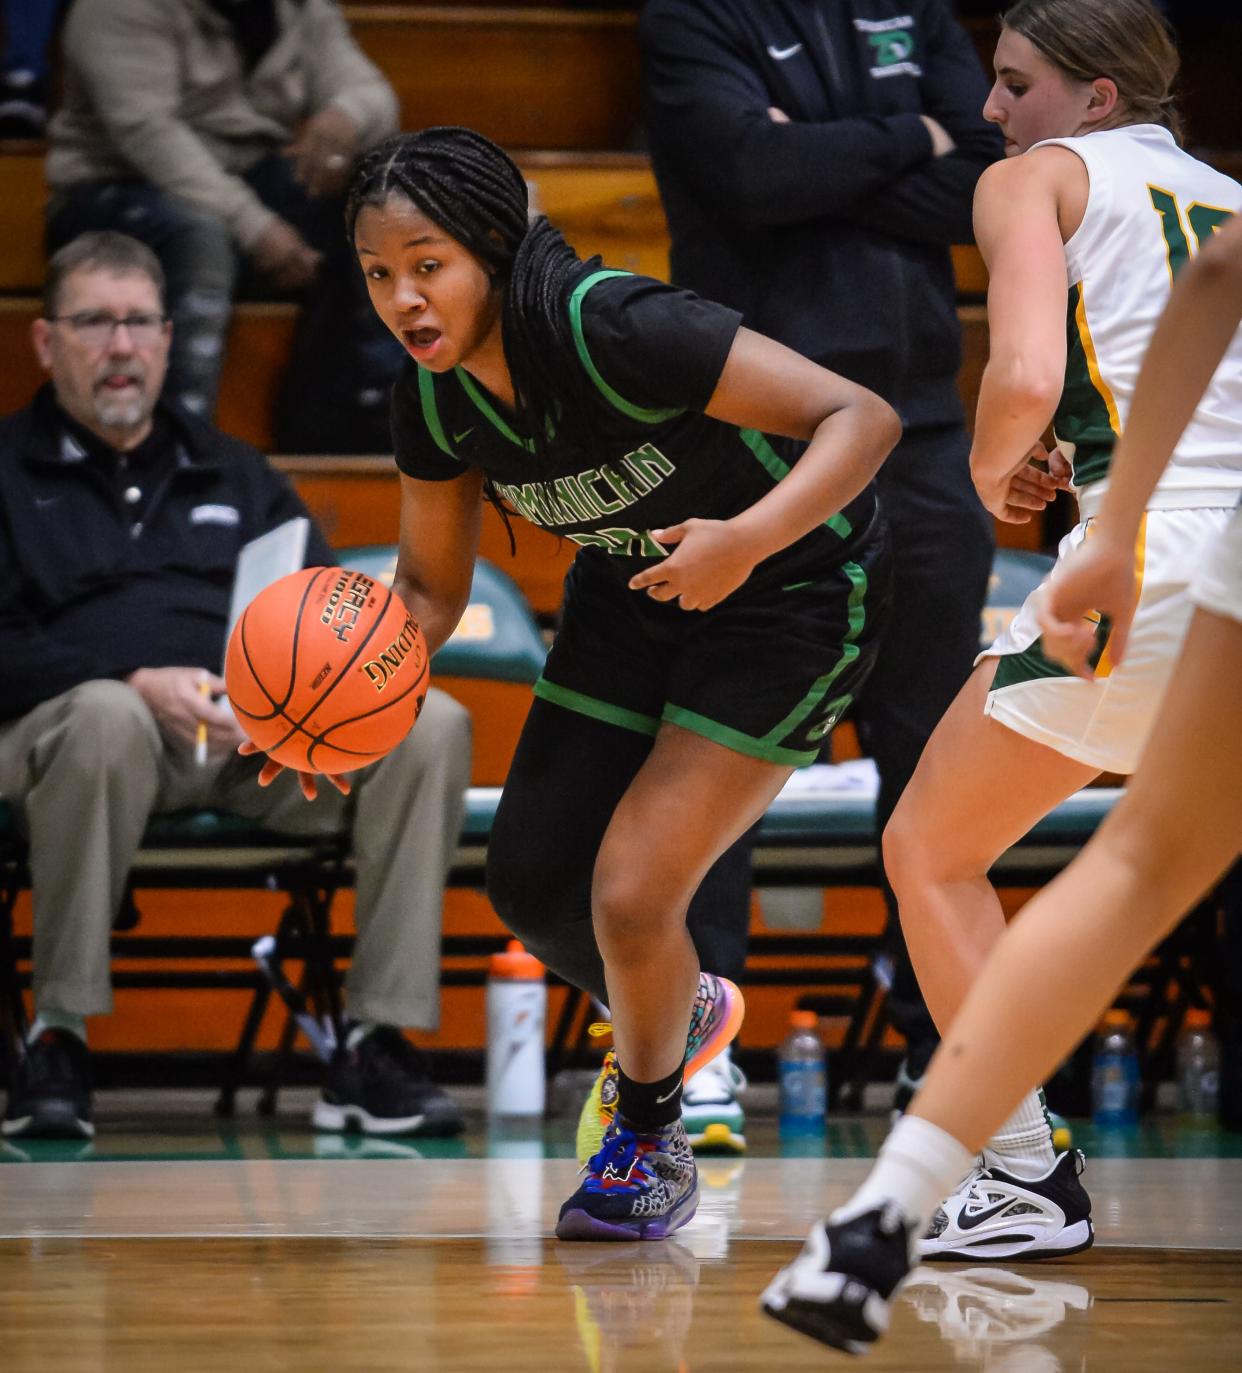 Whitefish Bay Dominican guard Keona McGee (11) averaged 14.7 points, 4.7 steals, 4.2 rebounds and 4.2 assists last season.